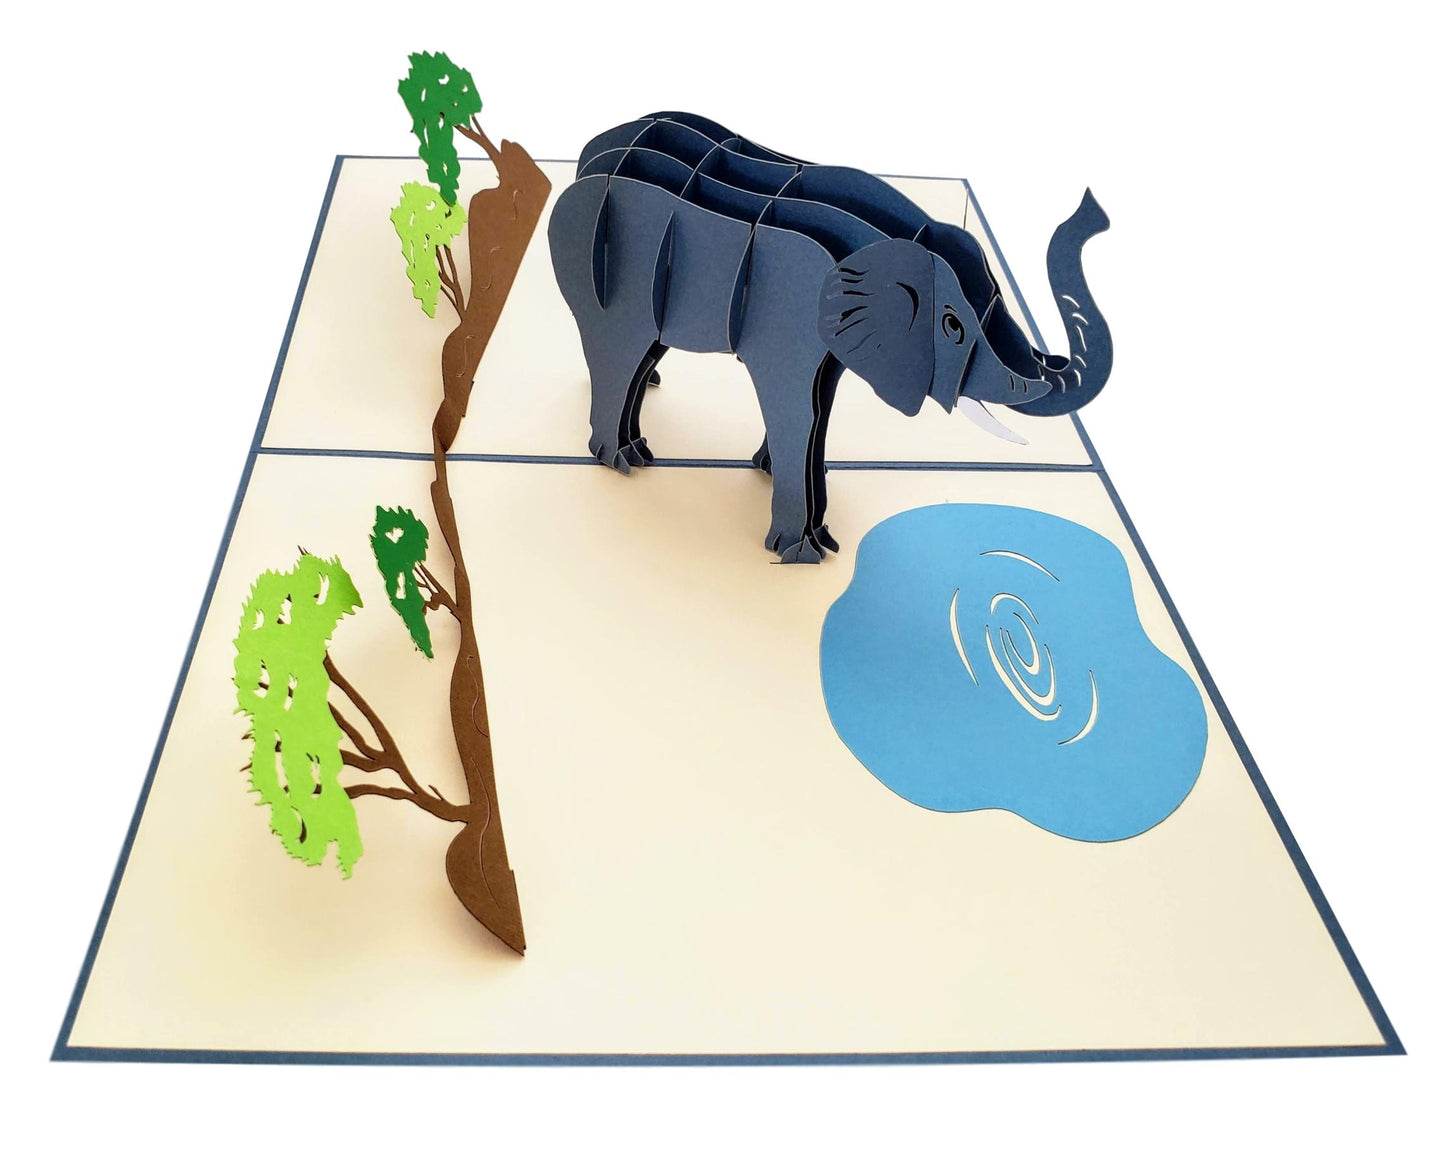 Majestic Elephant 3D Pop Up Greeting Card - All Occasion - Animal - Animals - Awesome - Birthday - C - iGifts And Cards